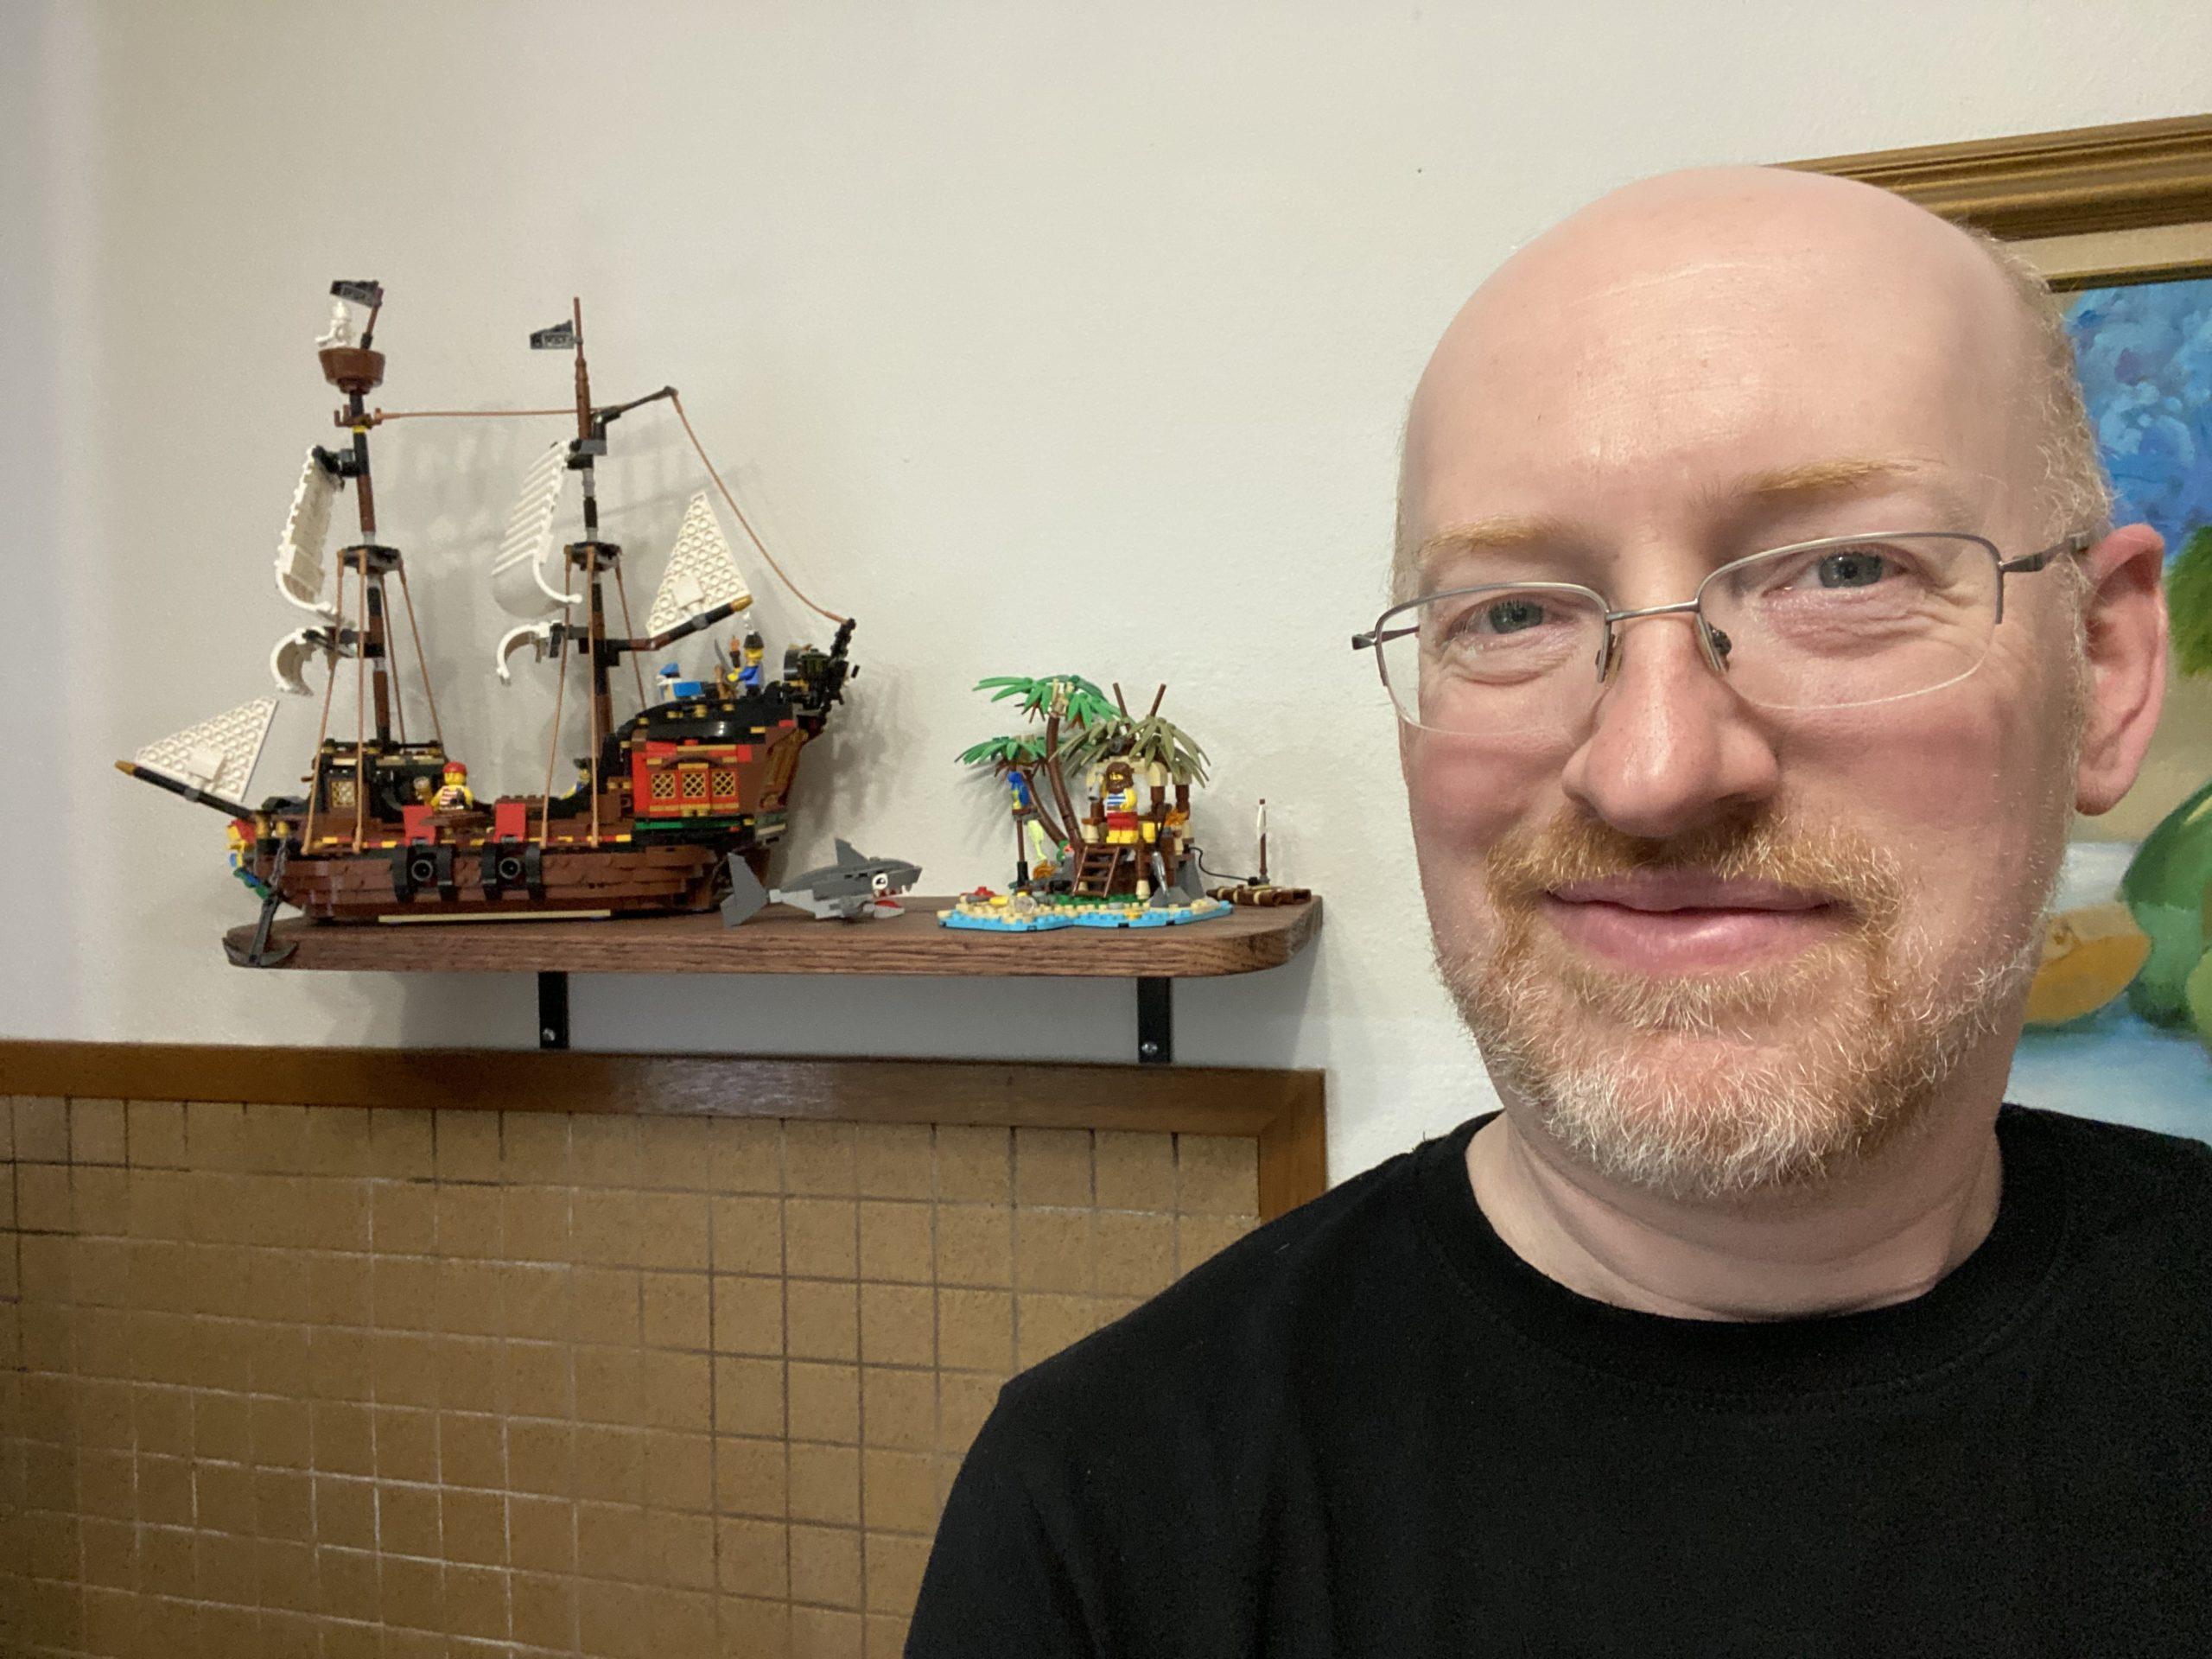 Me standing in front of a wall; on a shelf mounted on the wall is a Lego pirate ship, shark, and small desert island with a castaway.